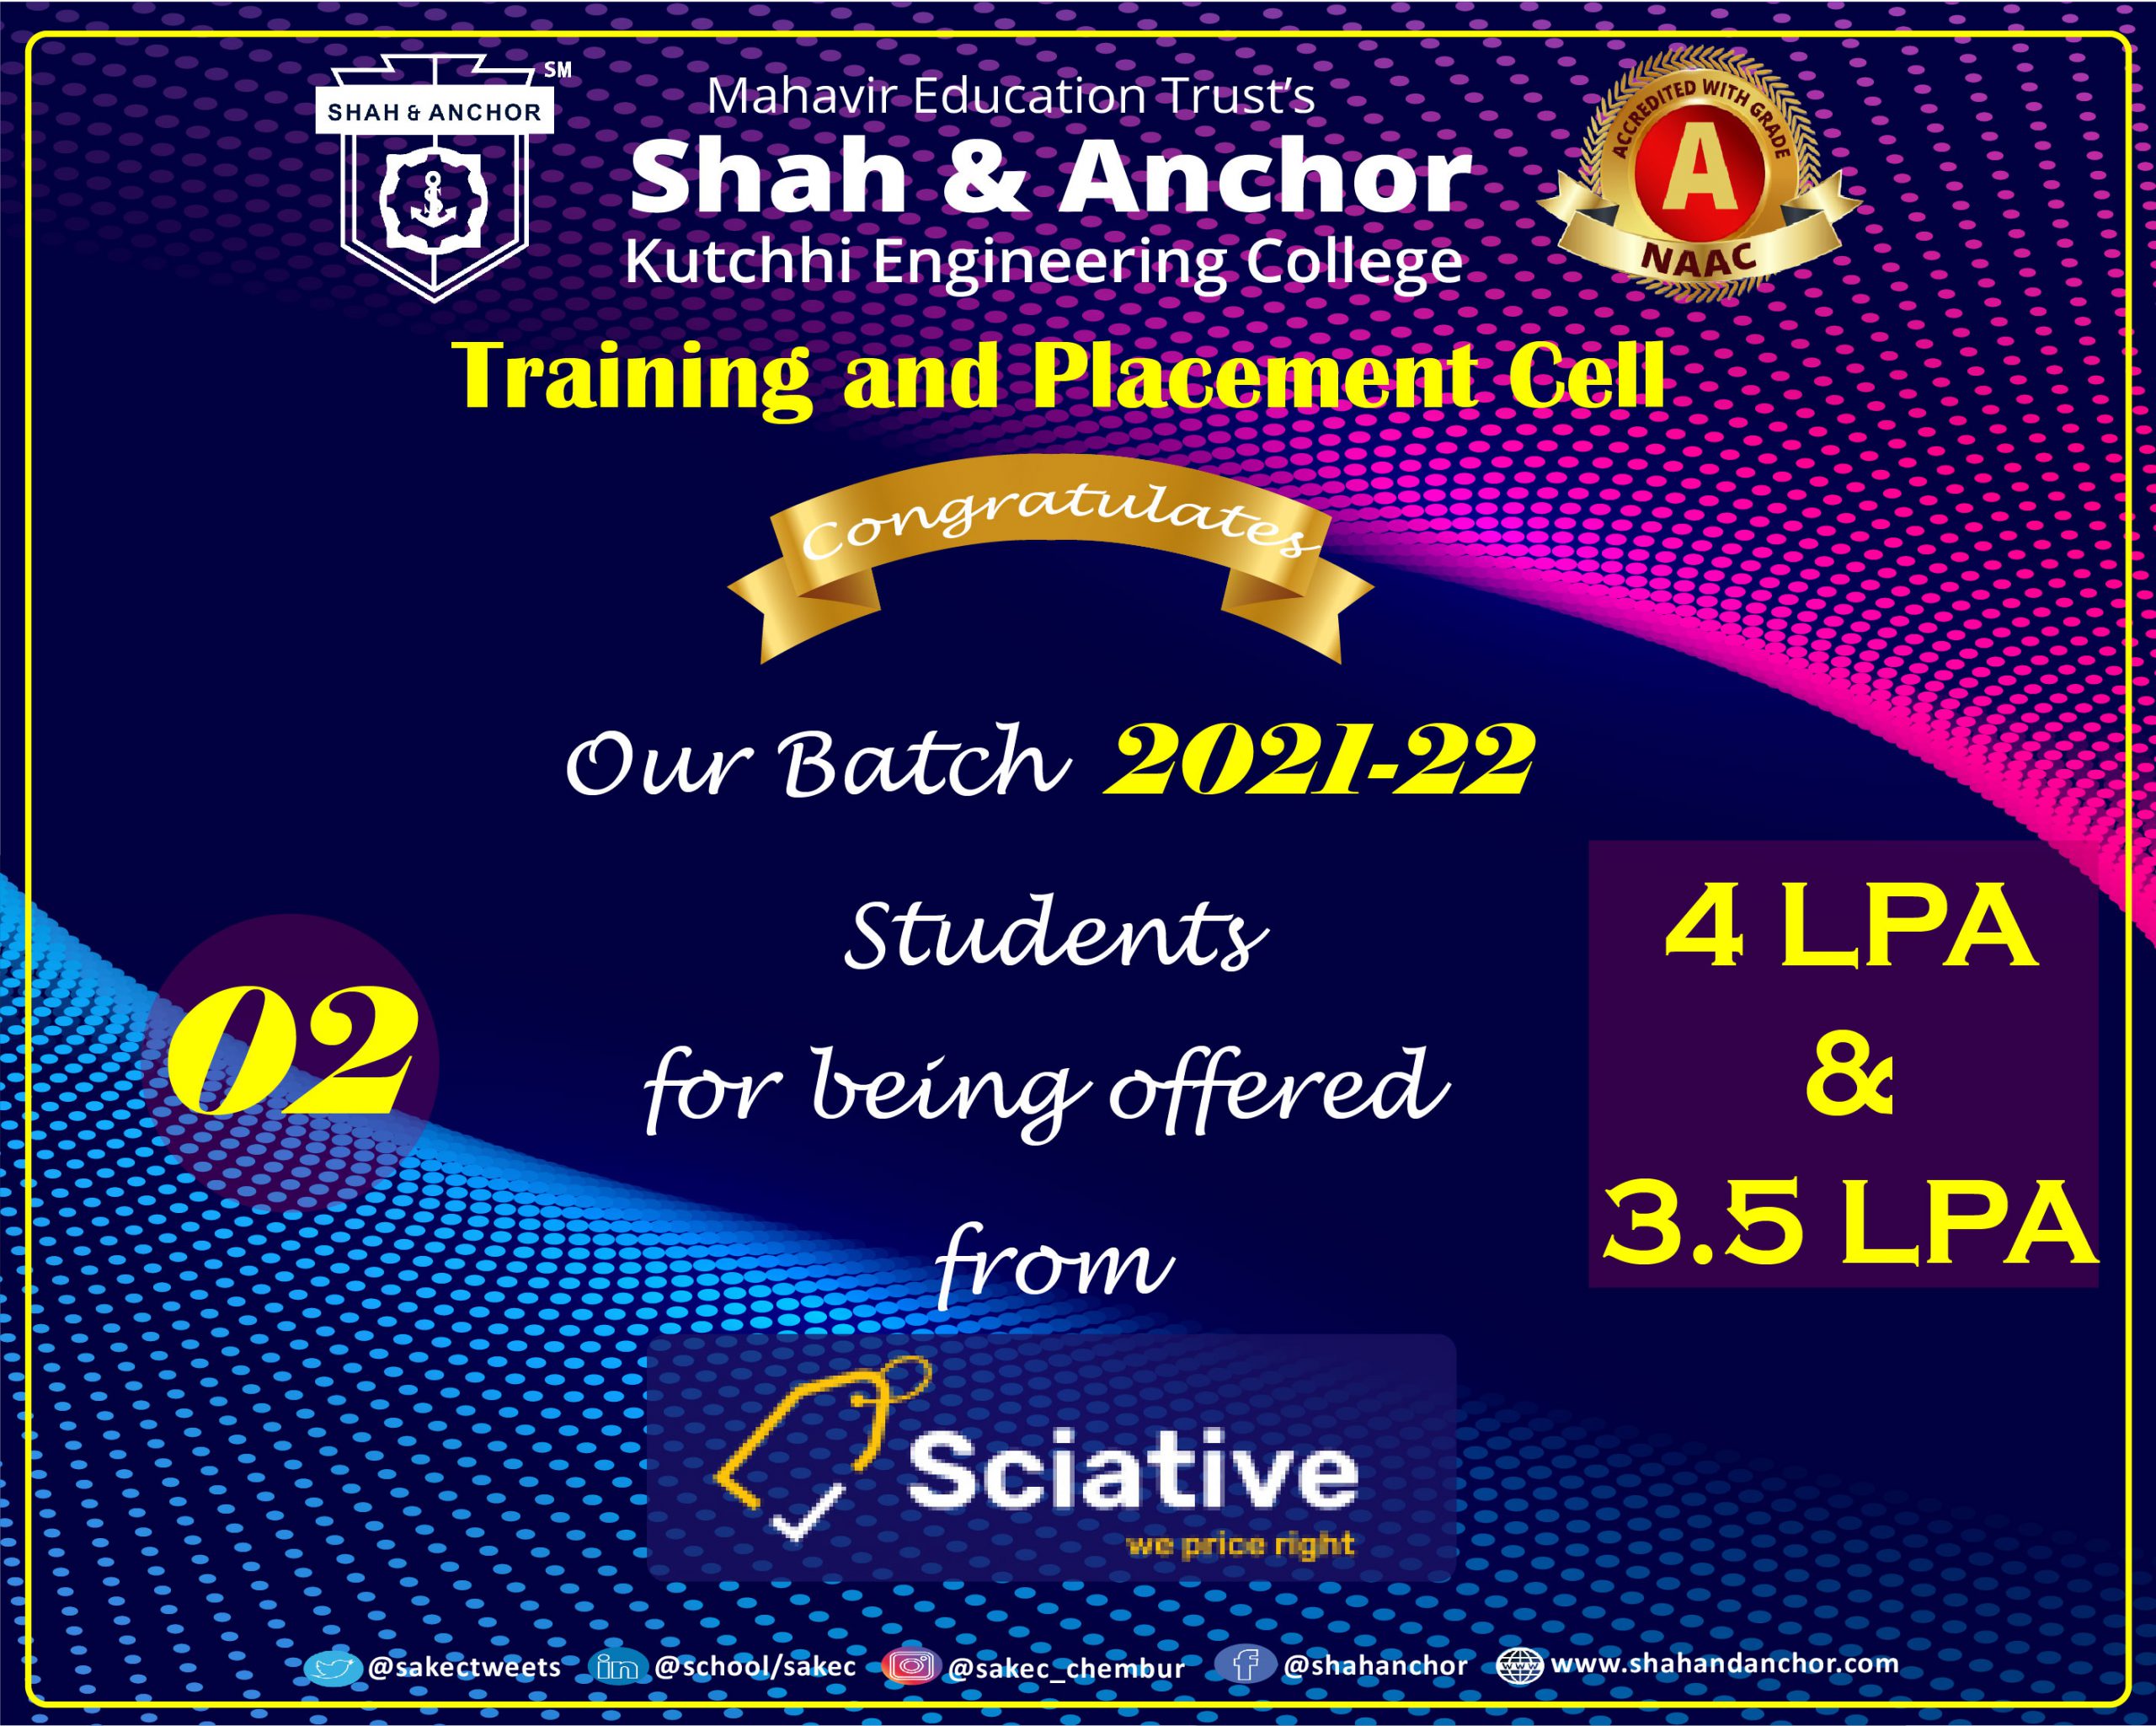 Sciative placed students